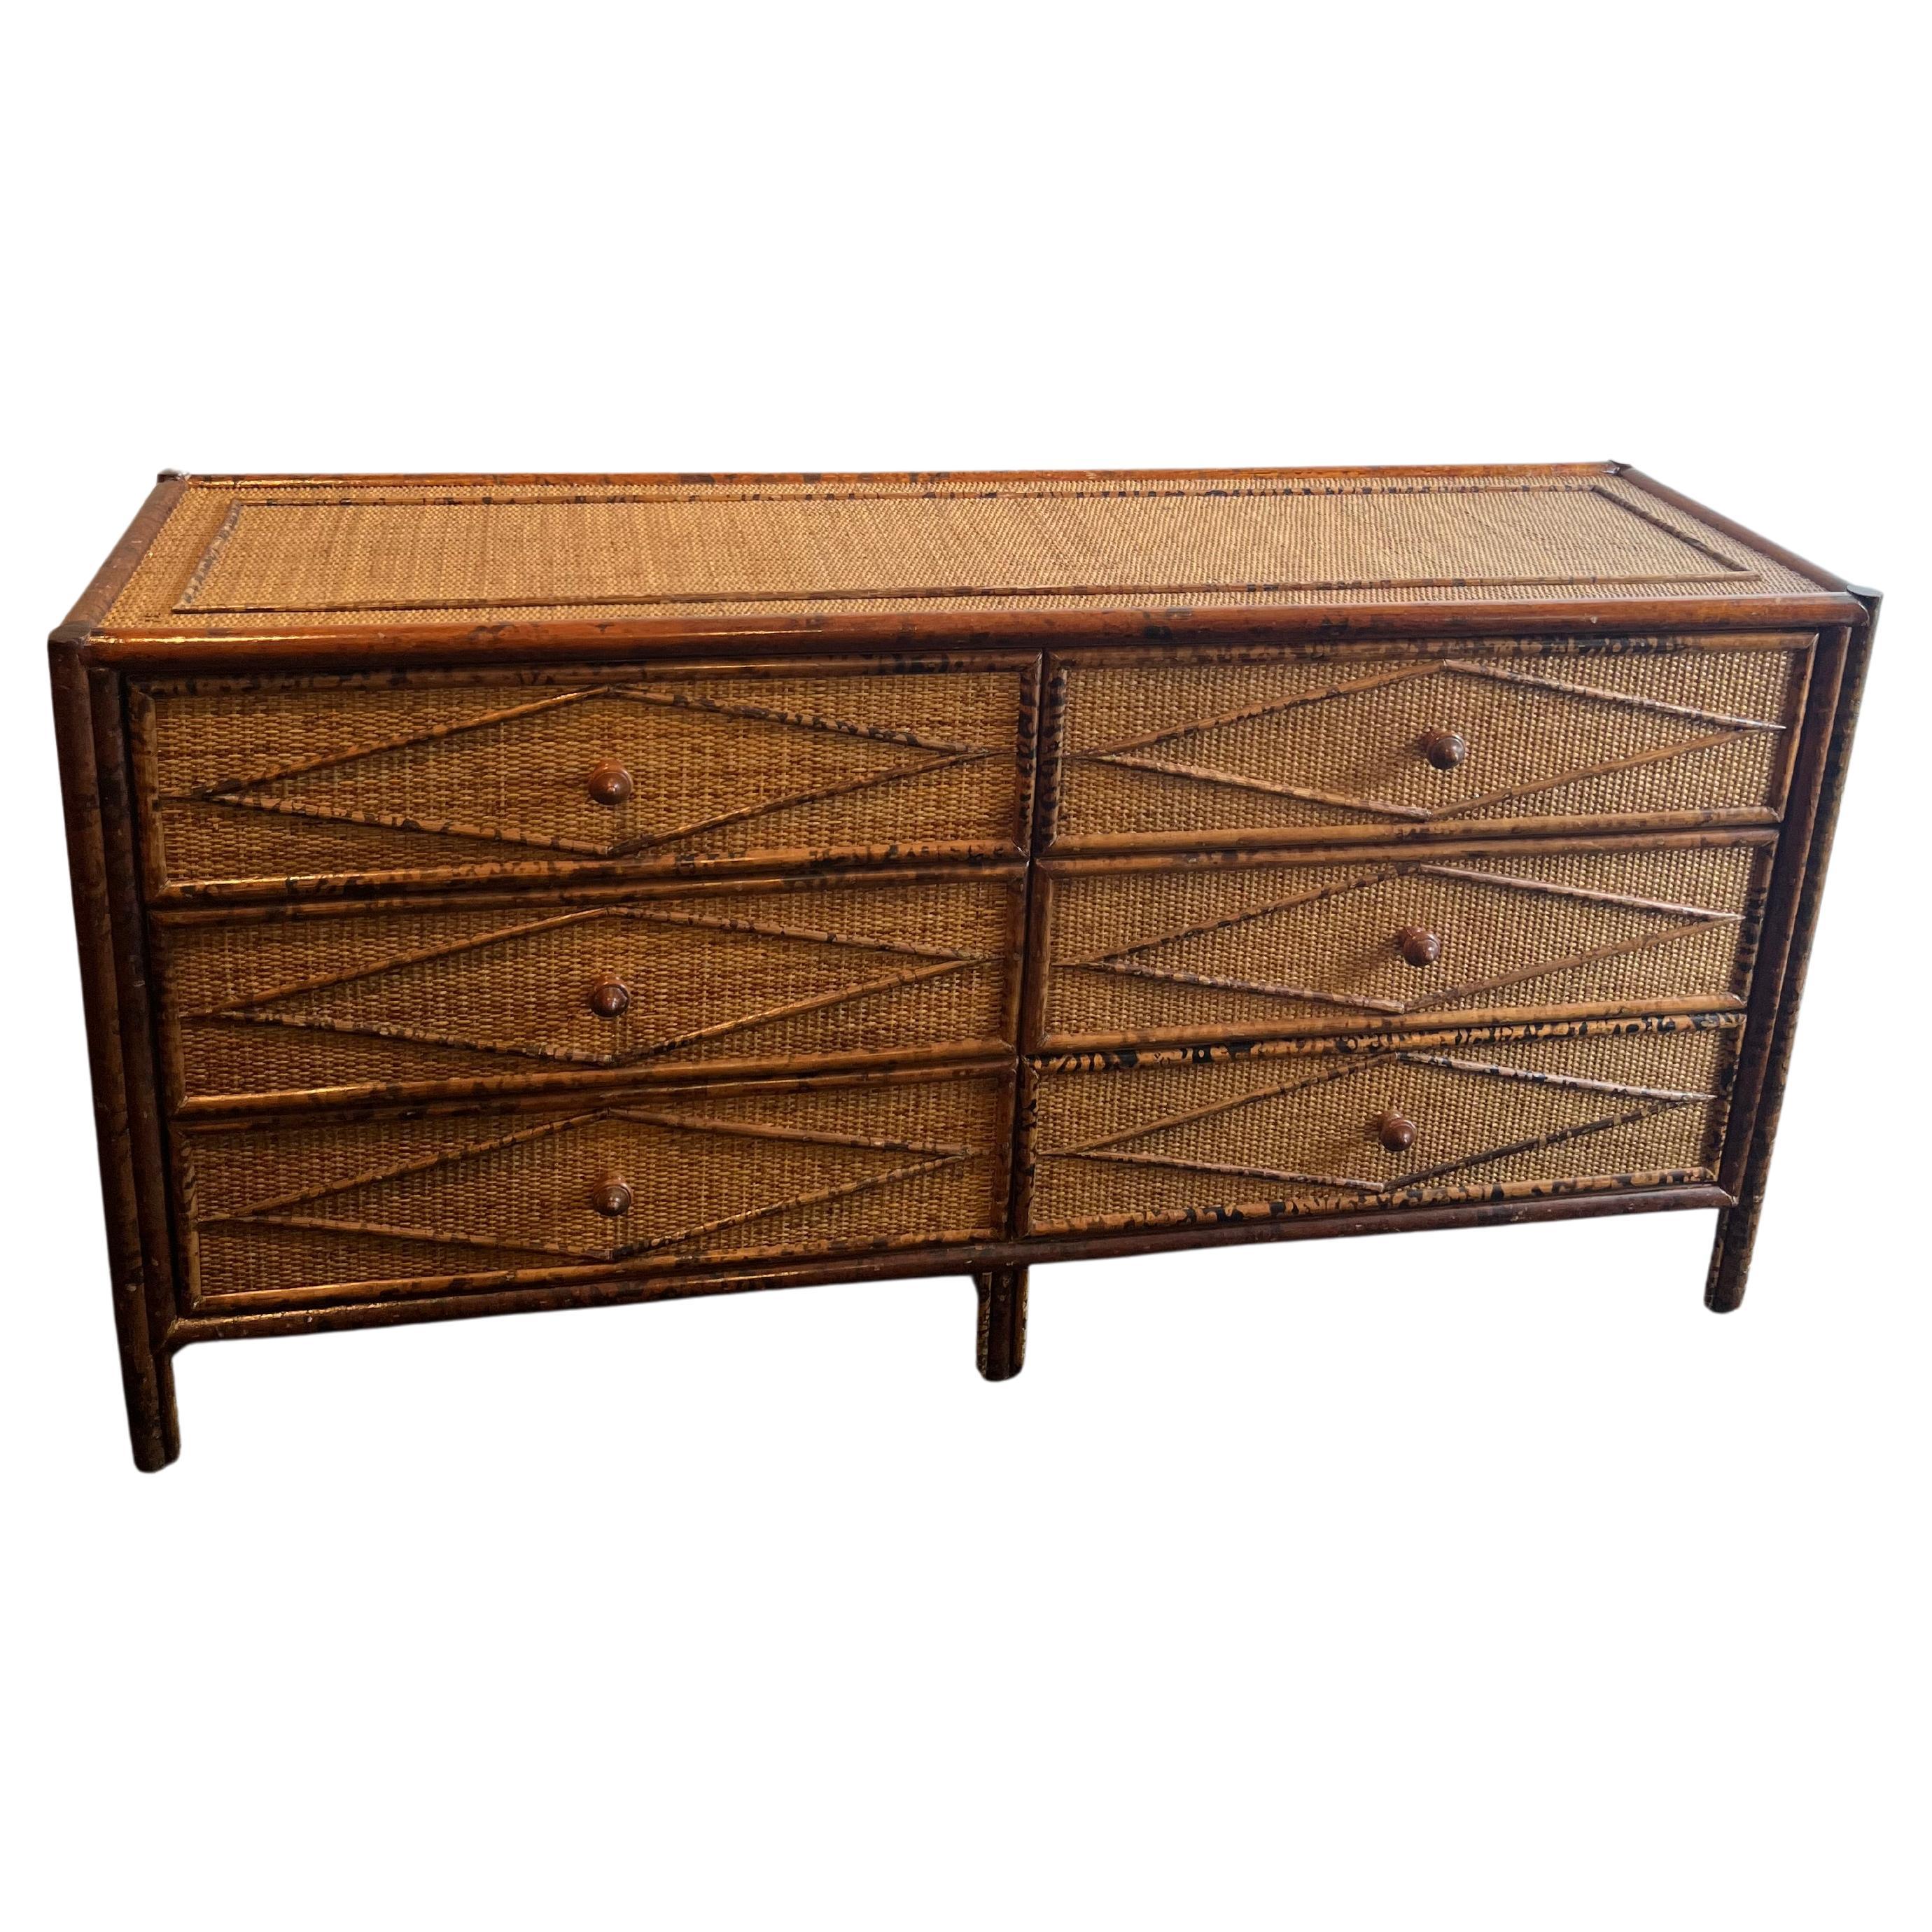 British Colonial Style Burnt Bamboo and Cane Dresser